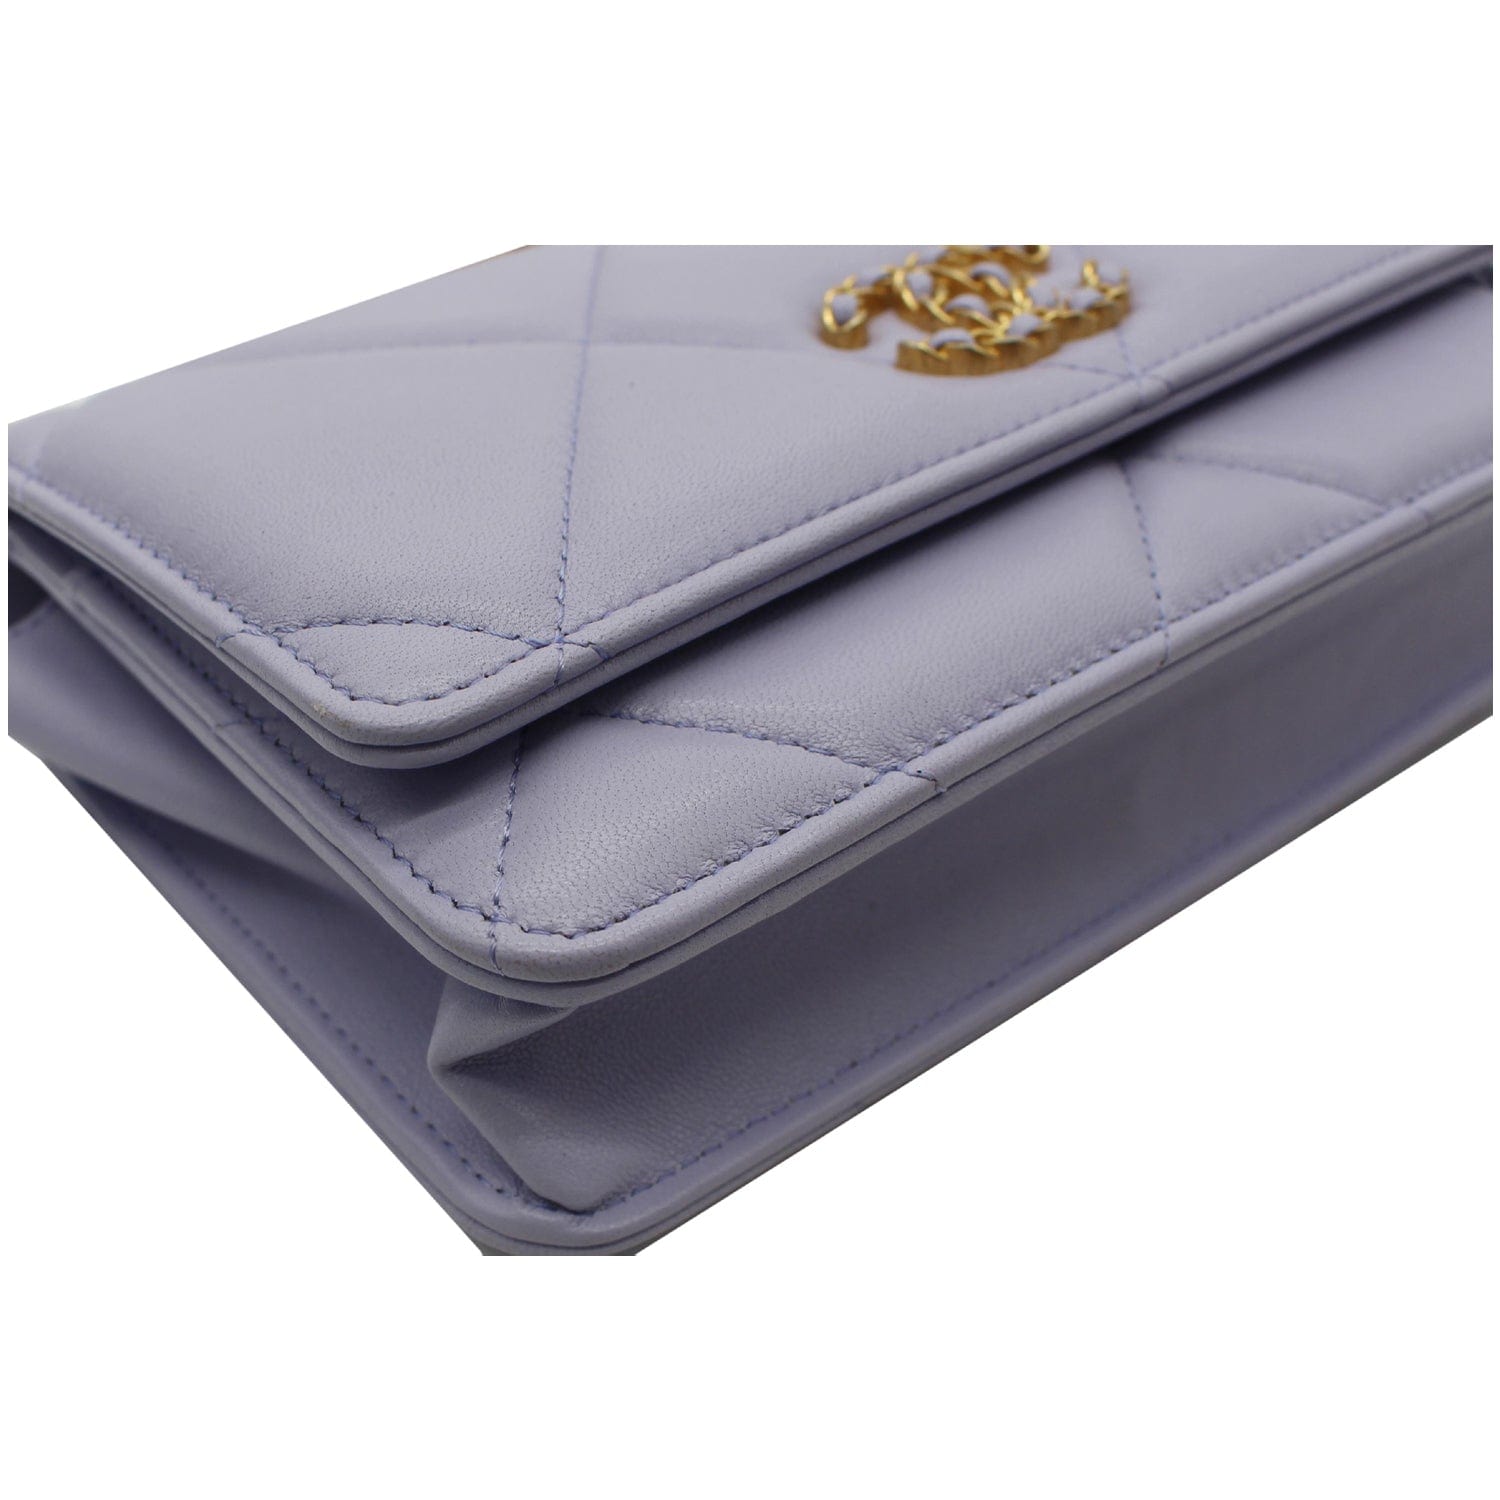 Chanel Purple Metallic Wallet on a Chain Re-issue – Audrey's of Naples